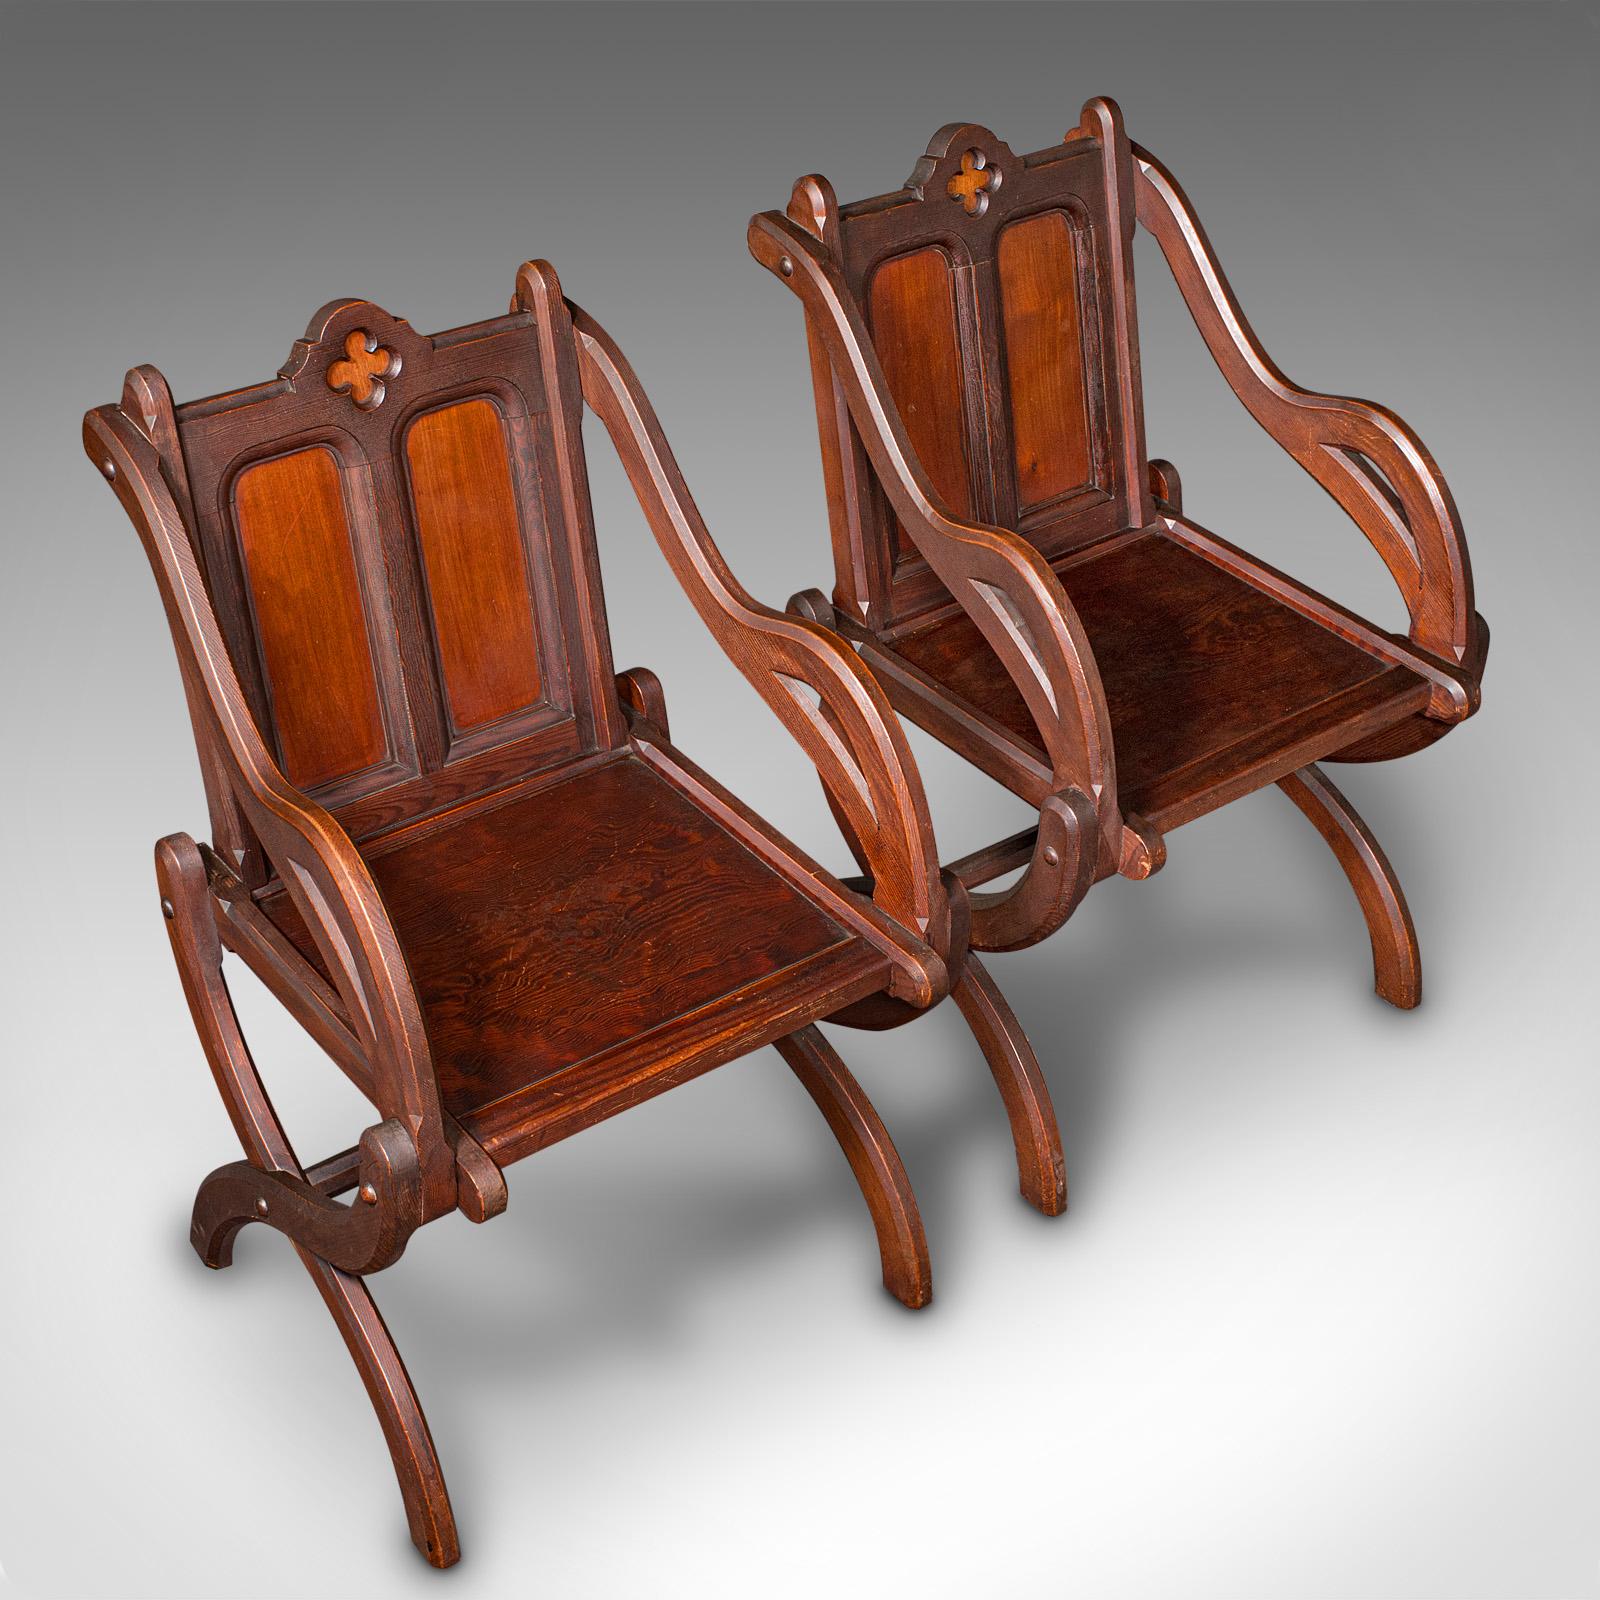 Pair of Antique Glastonbury Chairs, English, Decorative Armchair, Gothic Revival For Sale 1